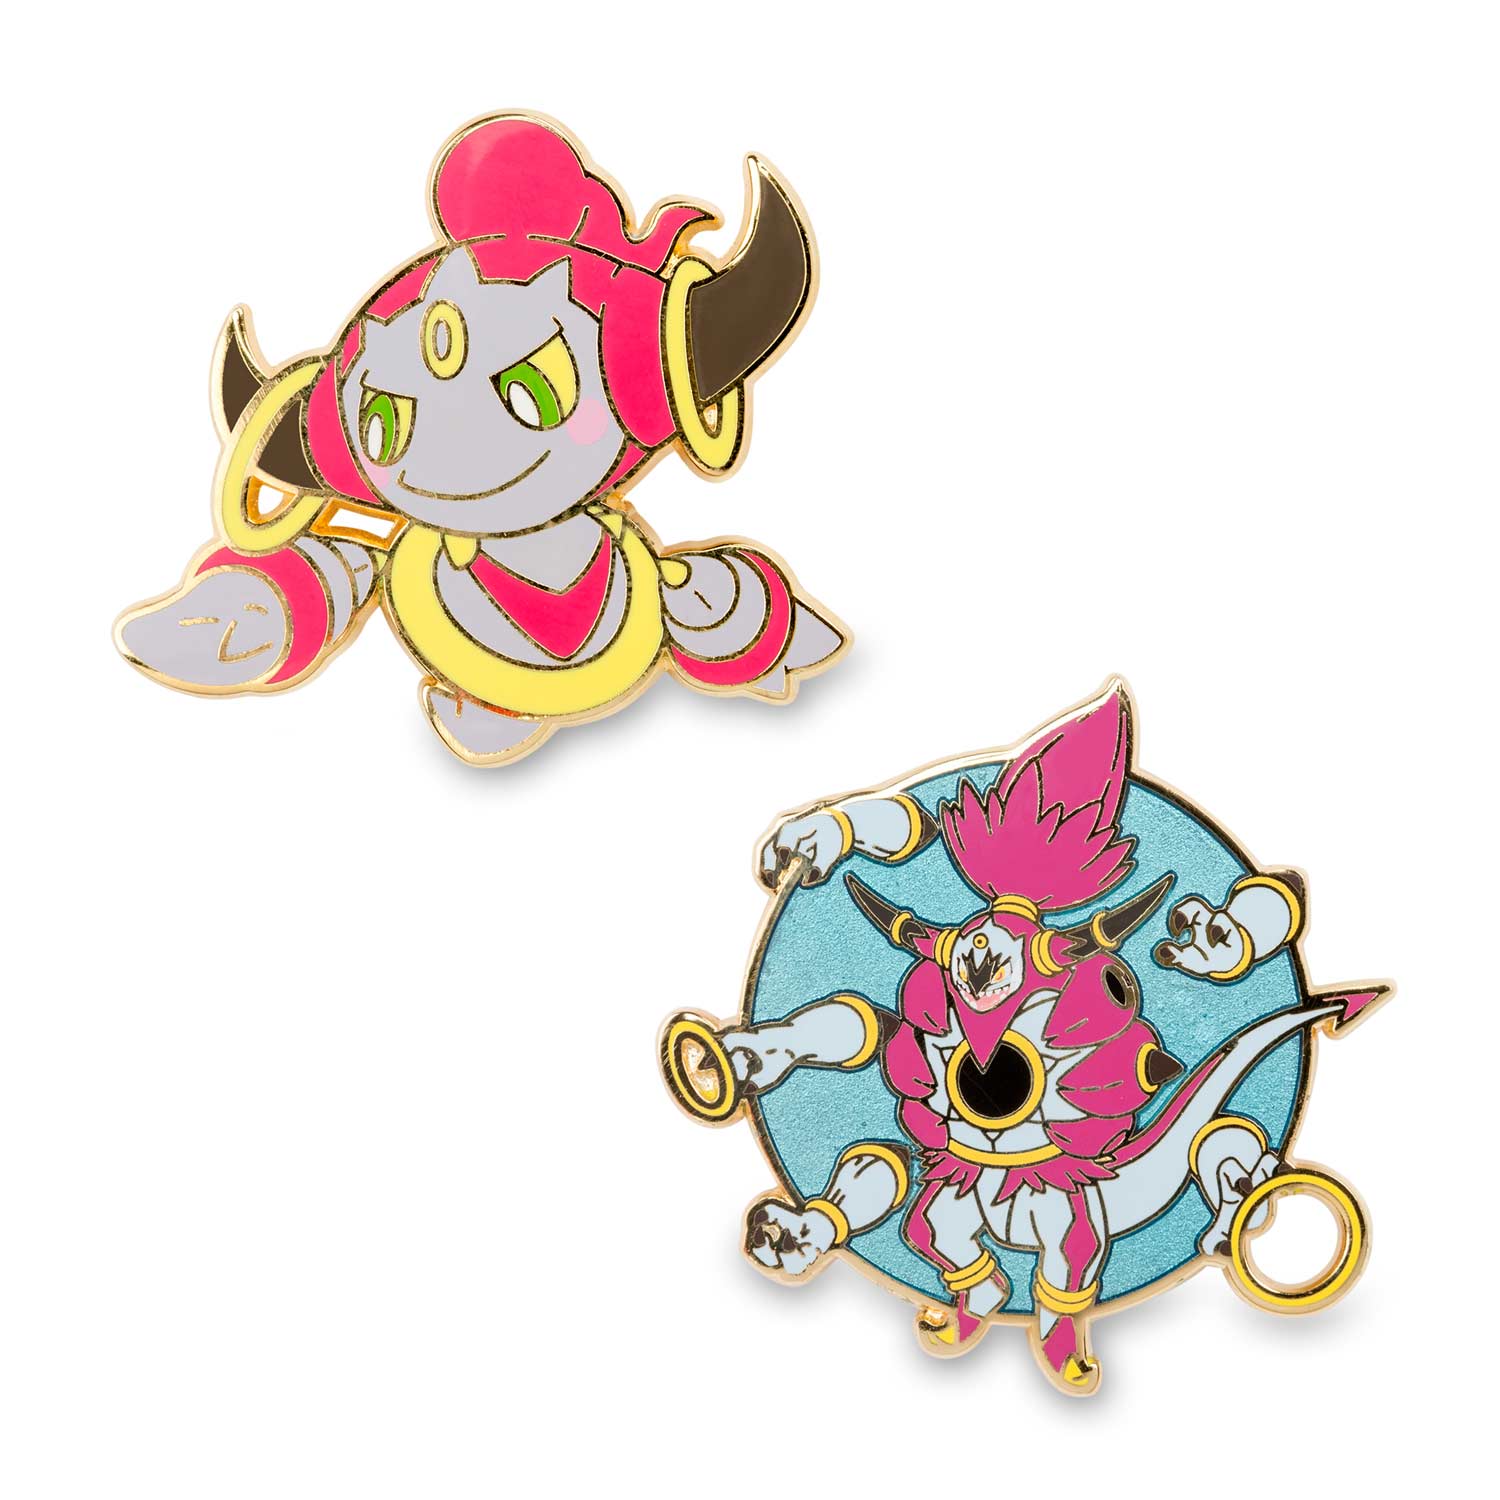 Hoopa Pokemon Pins 2 Pack Pokemon Center Official Site